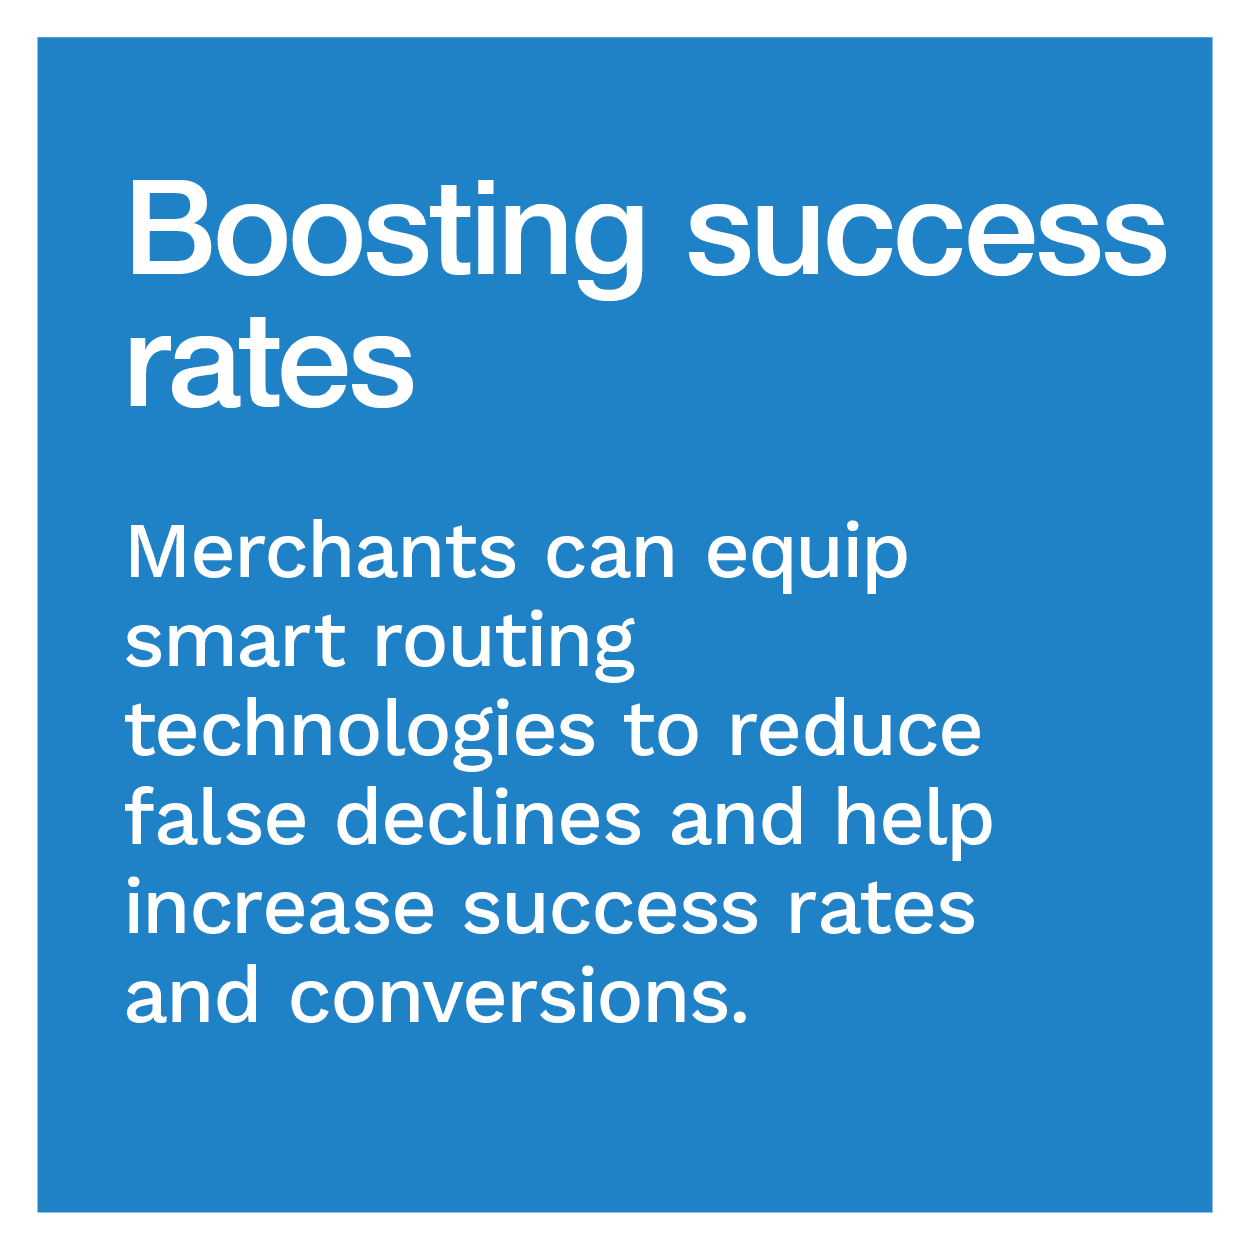 Boosting success rates: Merchants can equip smart routing technologies to reduce false declines and help increase success rates and conversions.